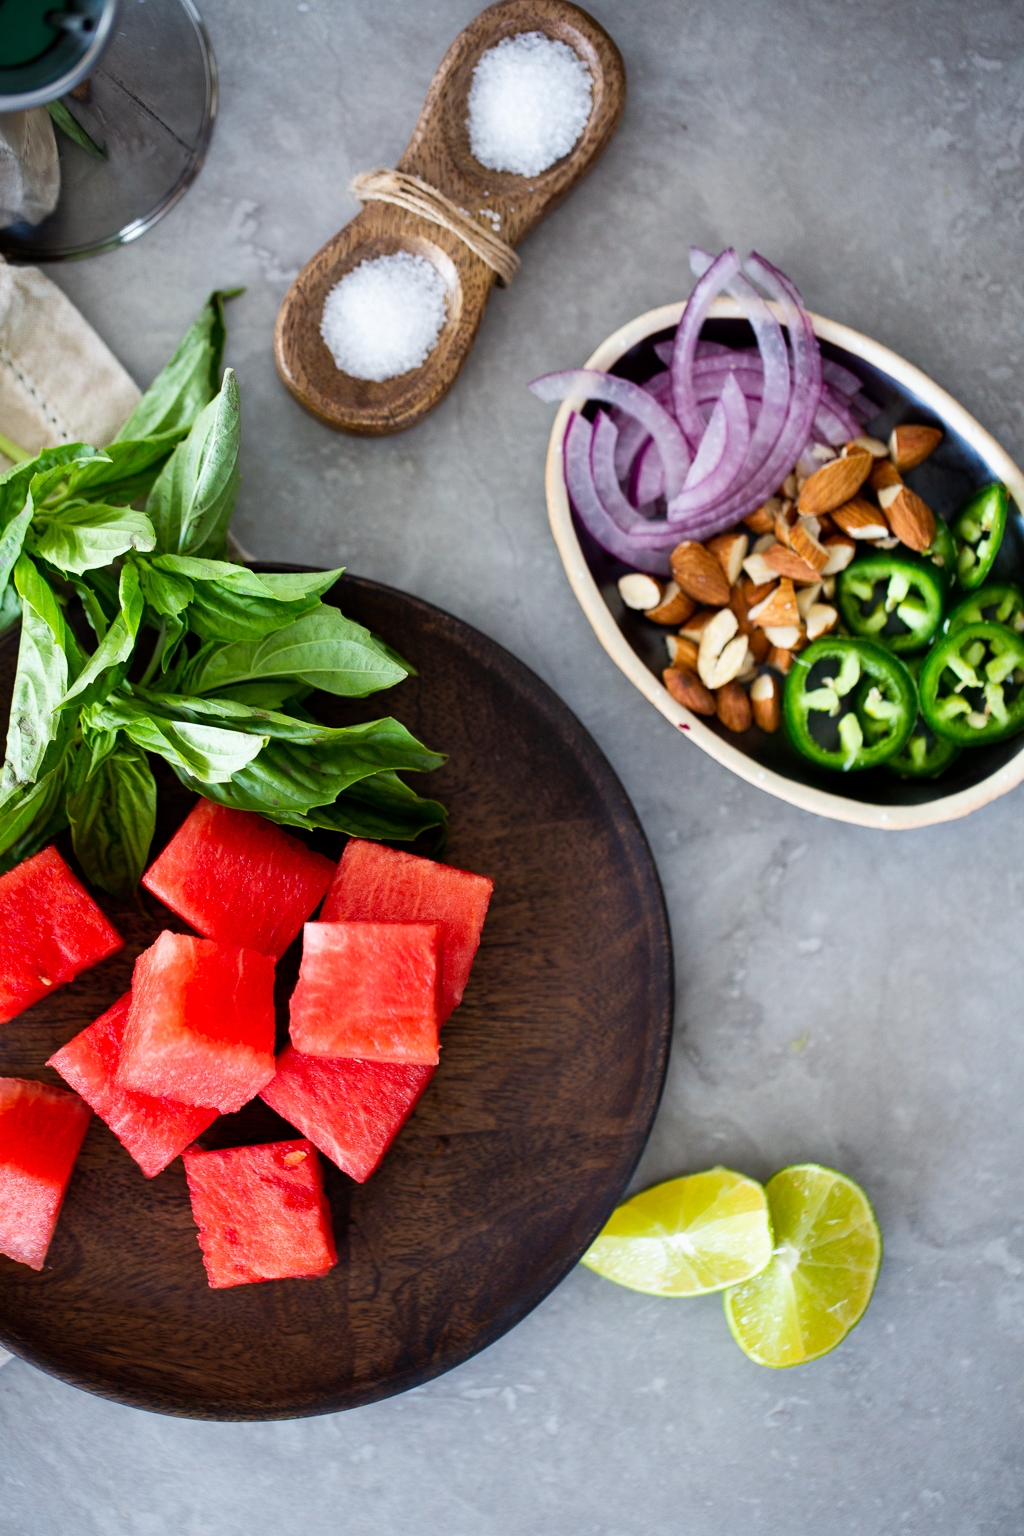 Watermelon, sliced onions, sliced chile, almonds and limes to prepare watermelon salad.